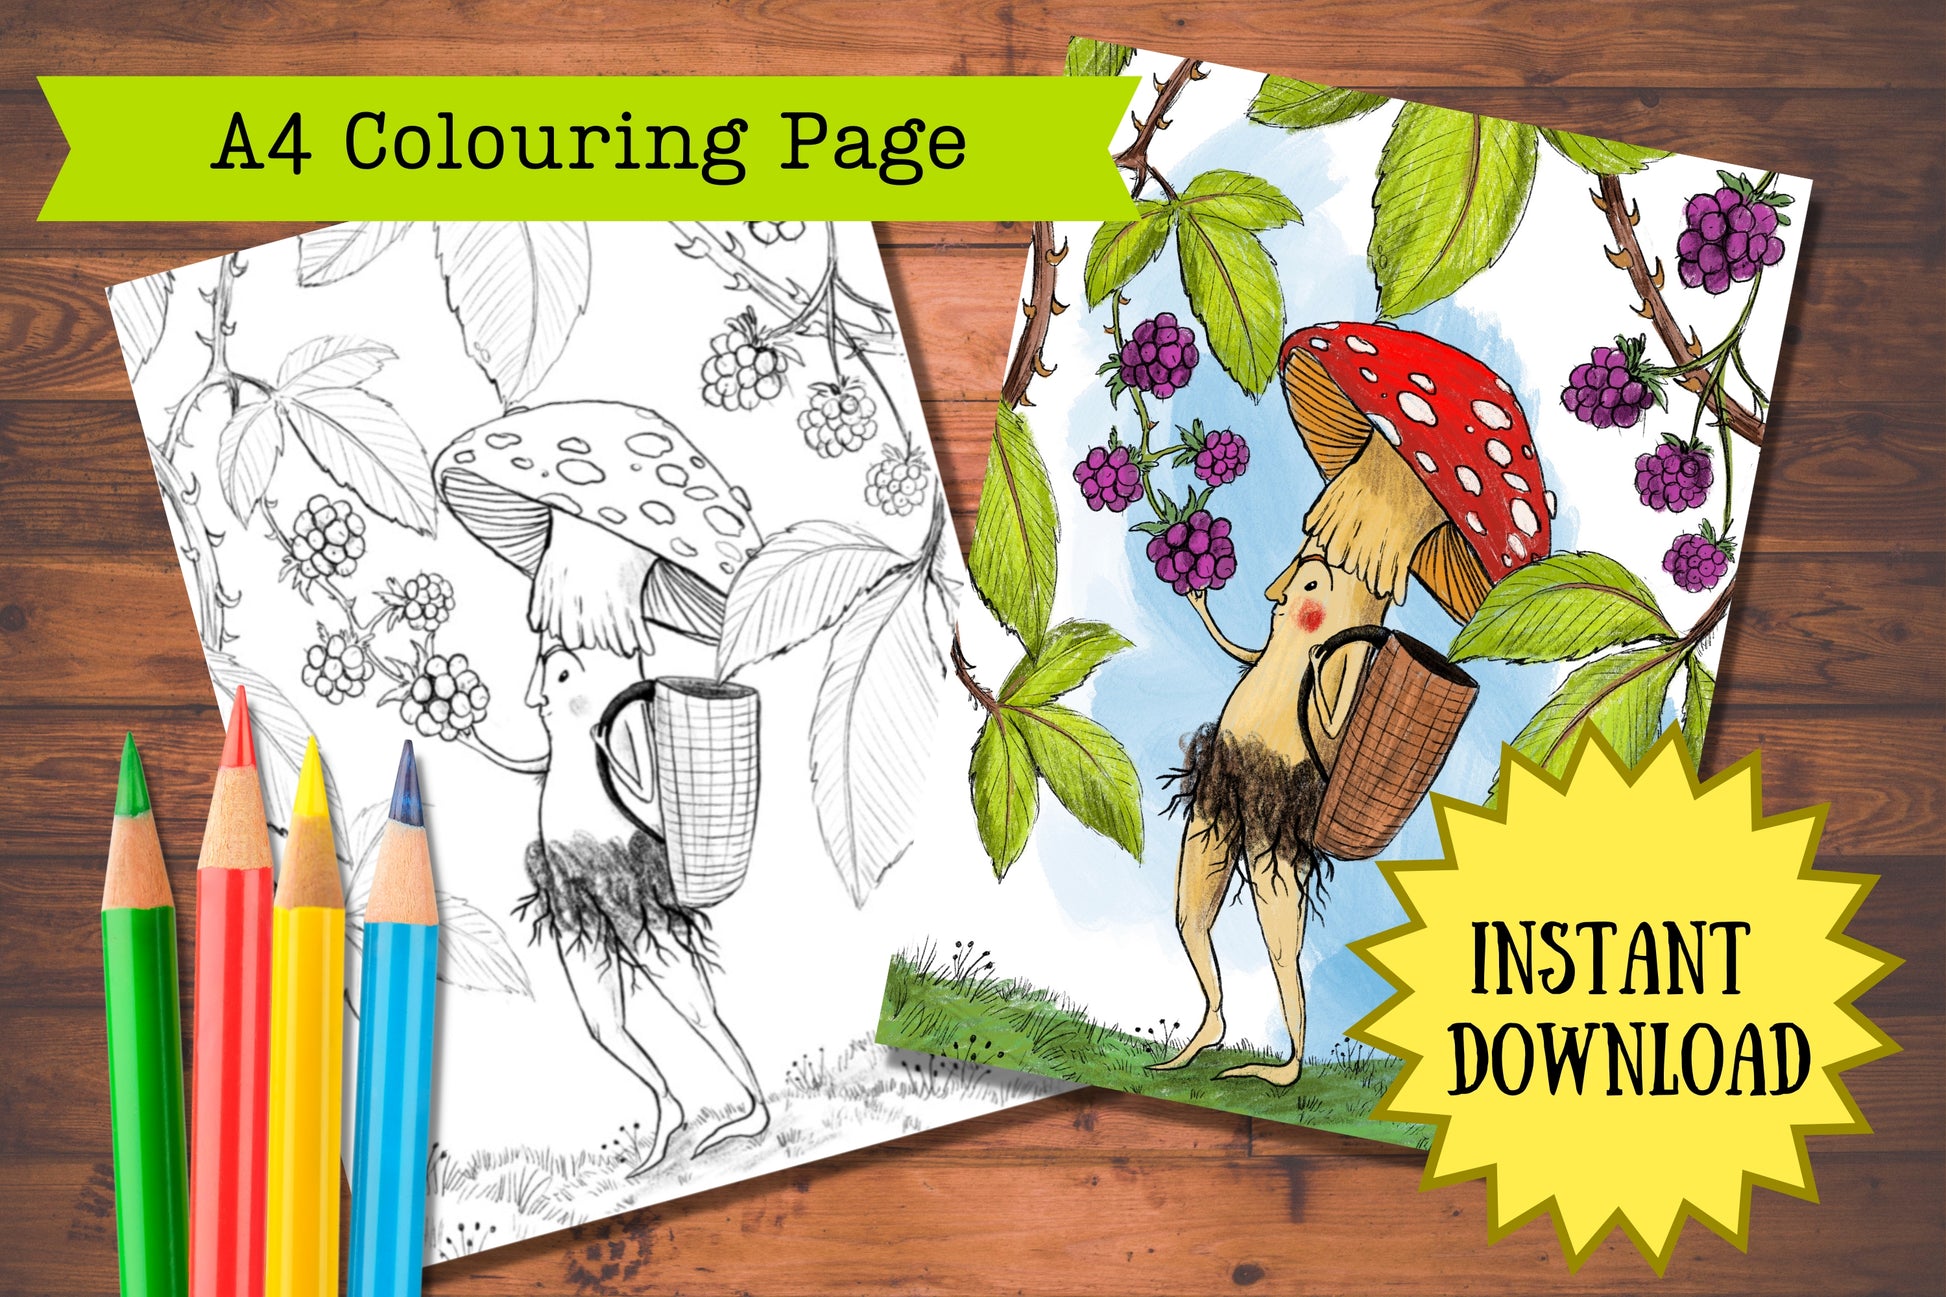 Anna Seed Art | Printable Colouring Page - Foraging (DIGITAL DOWNLOAD)